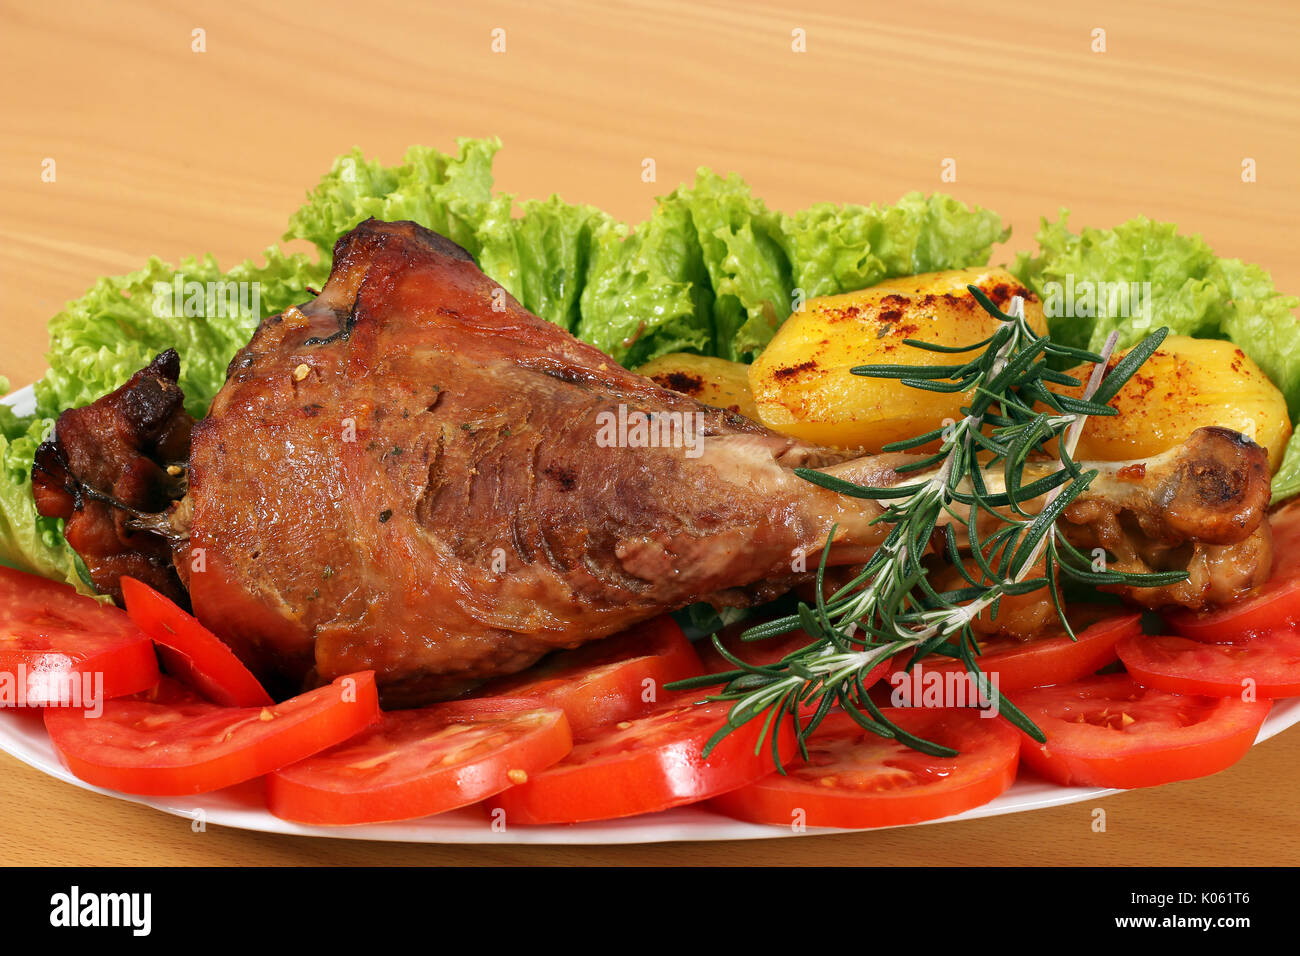 big turkey drumstick with potatoes and salad Stock Photo